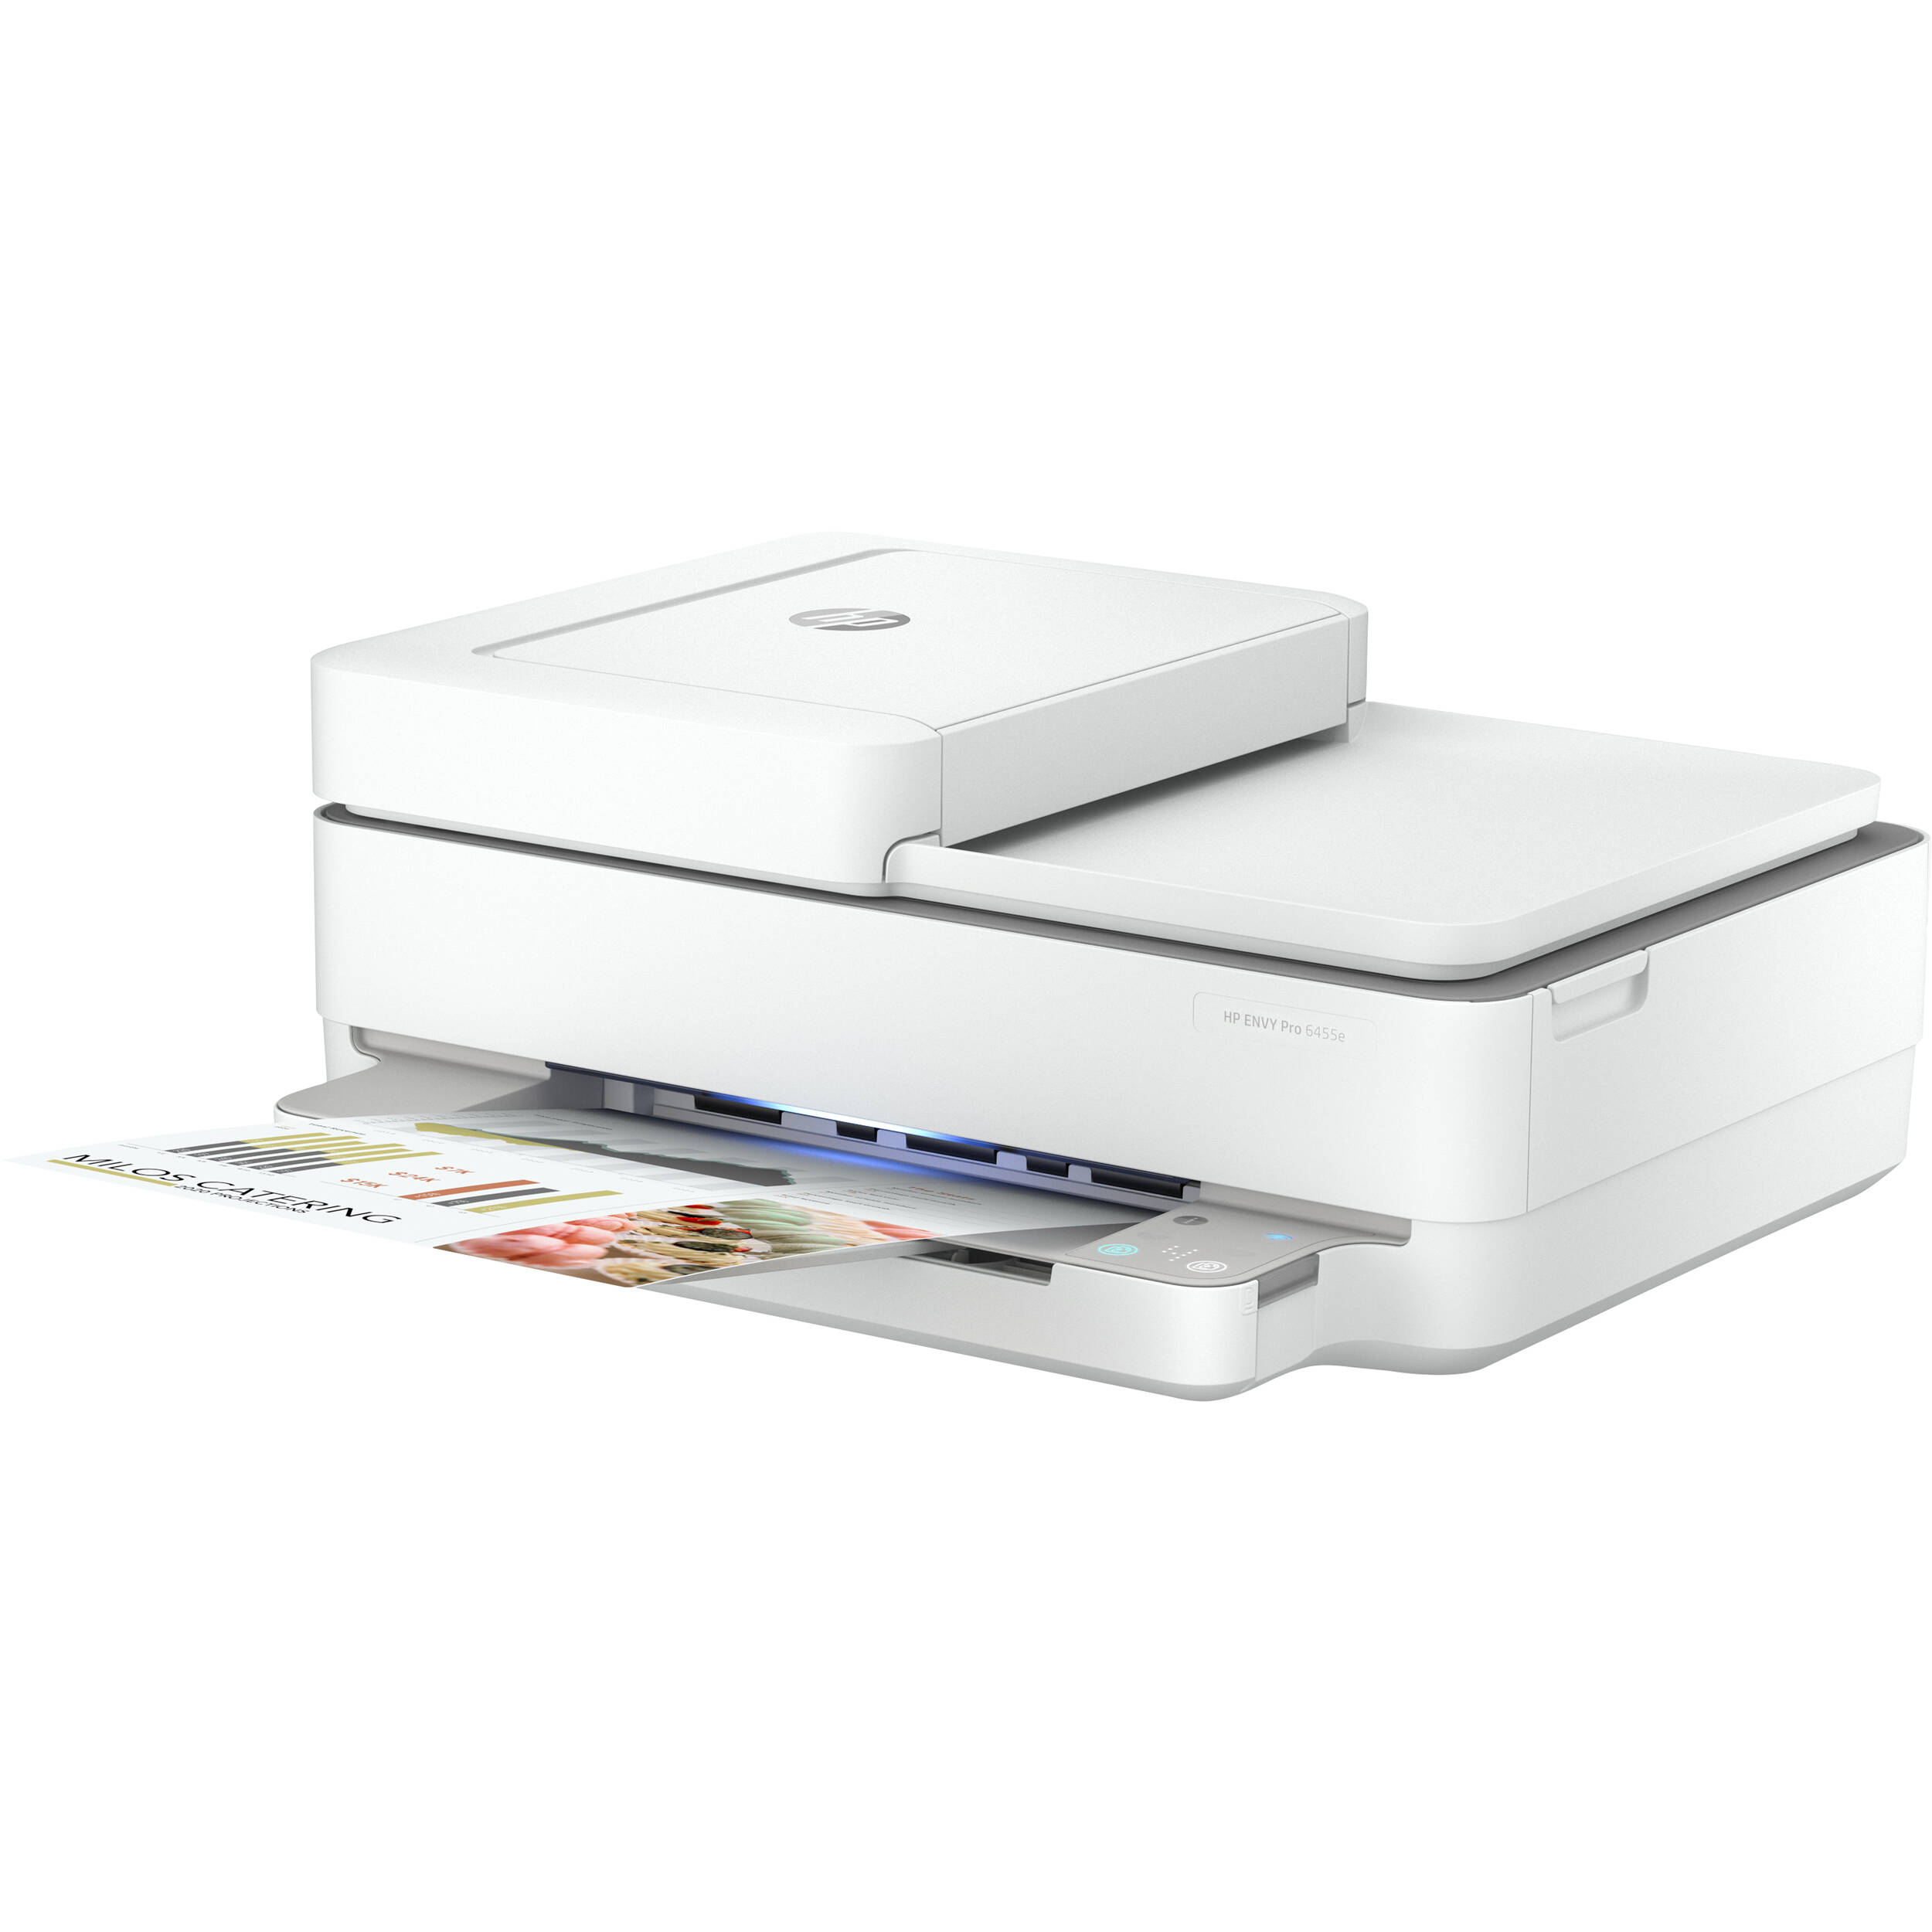 HP HP-ENVY6455E-RB ENVY Pro 6455e All-in-One Printer, White - Certified Refurbished